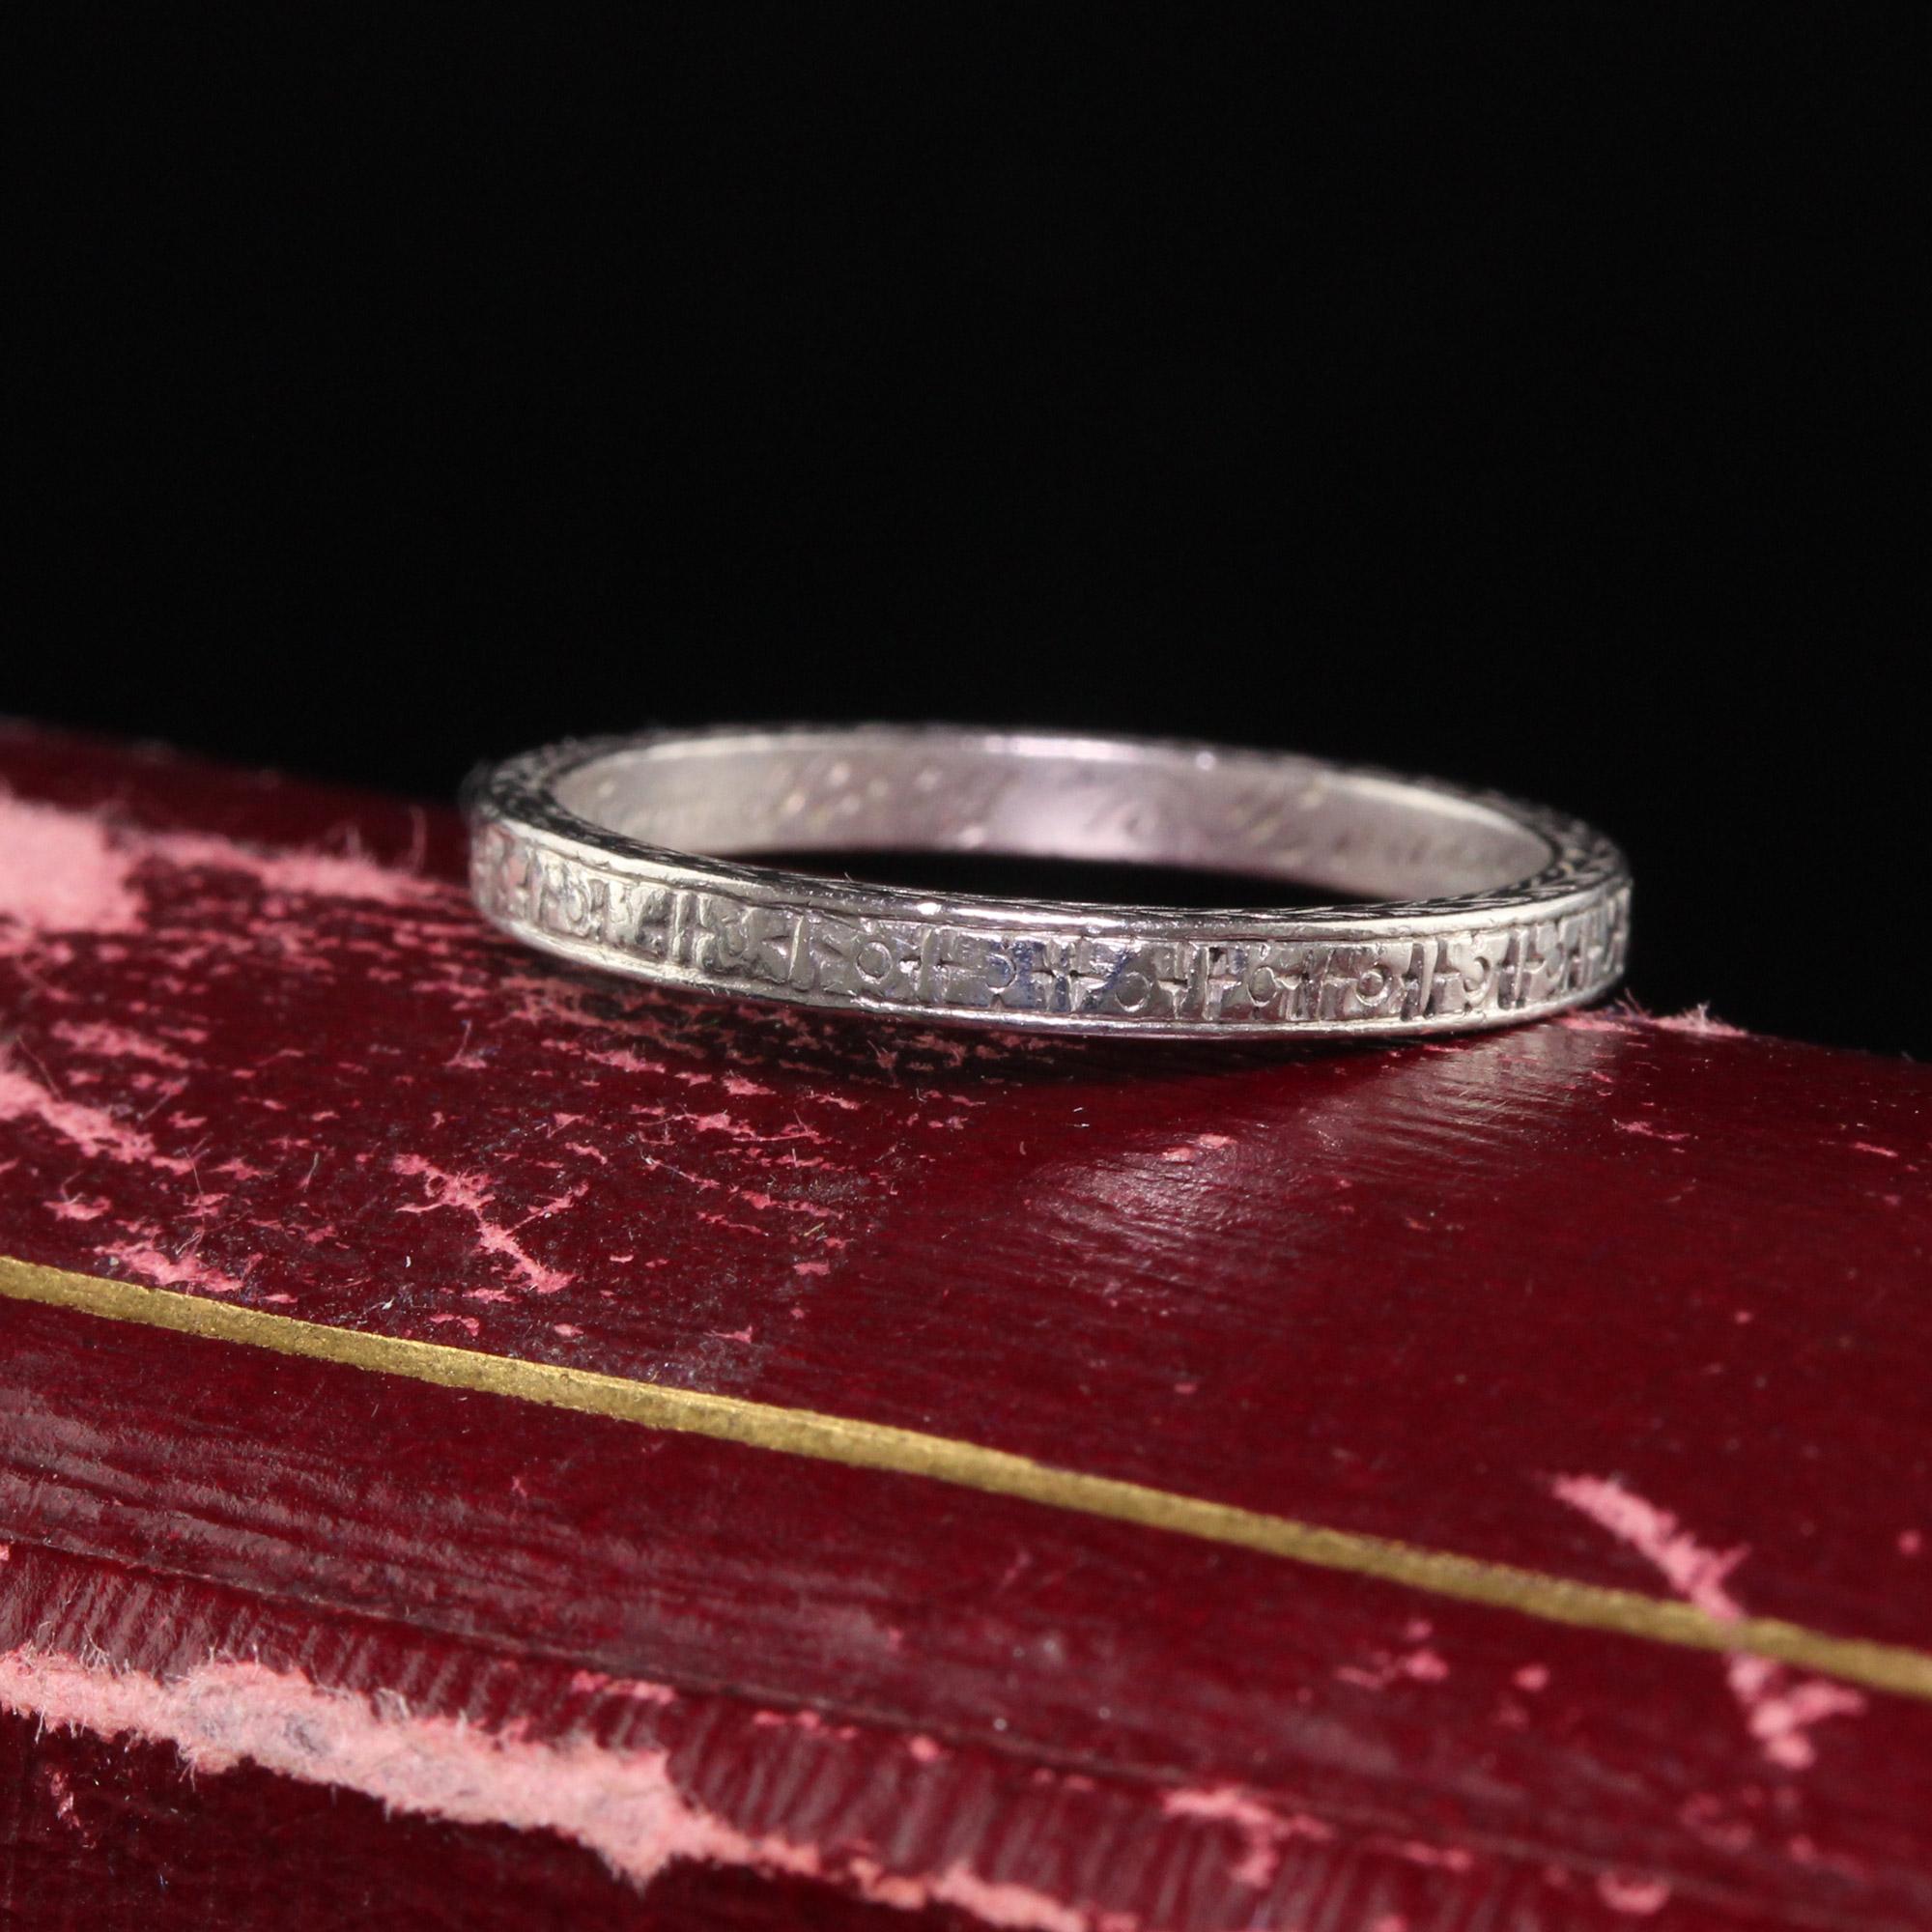 Beautiful Antique Art Deco Platinum Engraved Classic Wedding Band - Size 5. This gorgeous wedding band is crafted in platinum. It is beautifully engraved around the entire ring and even the sides. The inside of the band is also engraved with